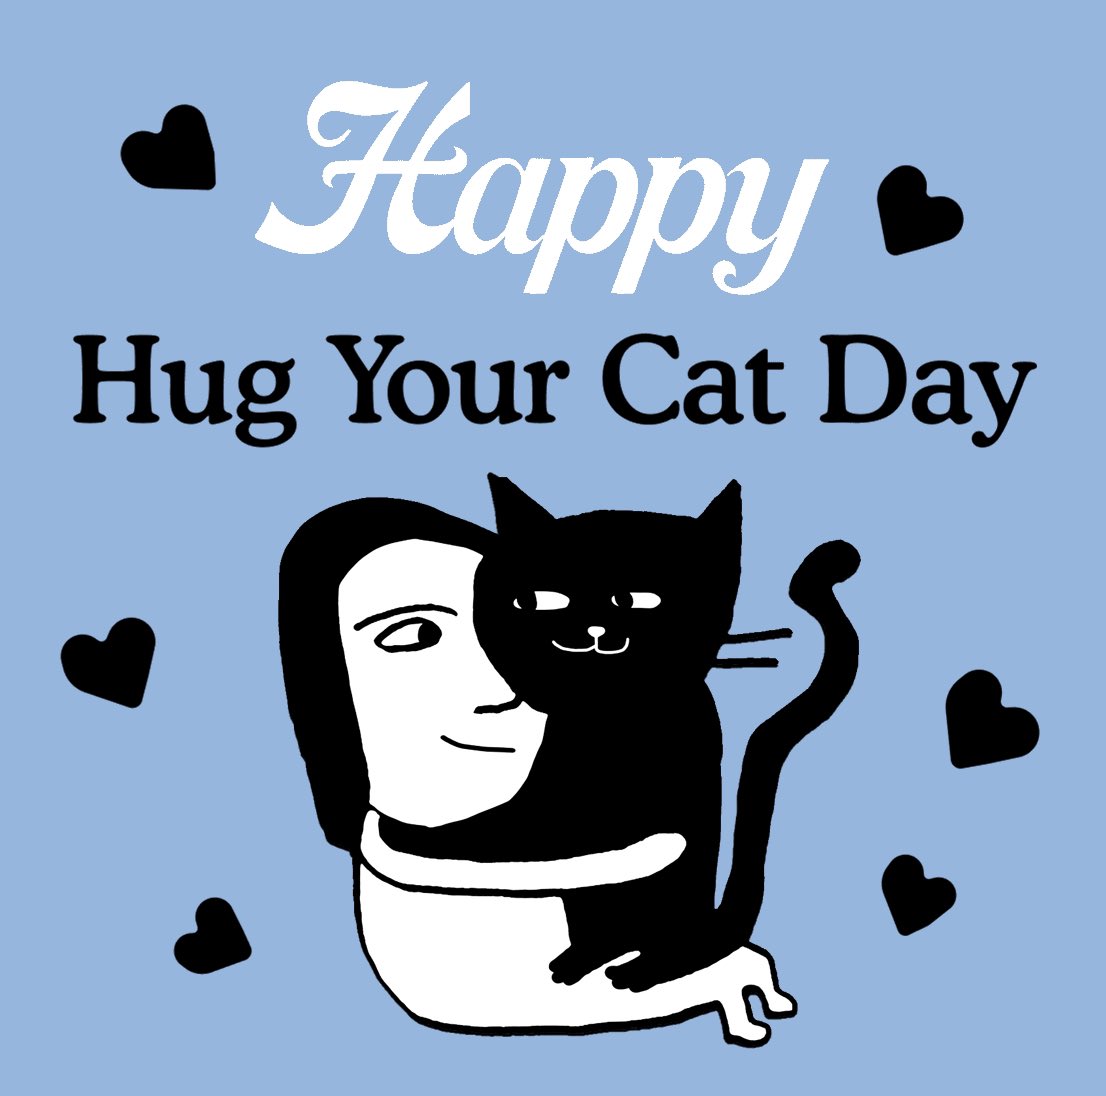 Happy #HugYourCatDay #CatsOfTwitter ❤️🐾❤️